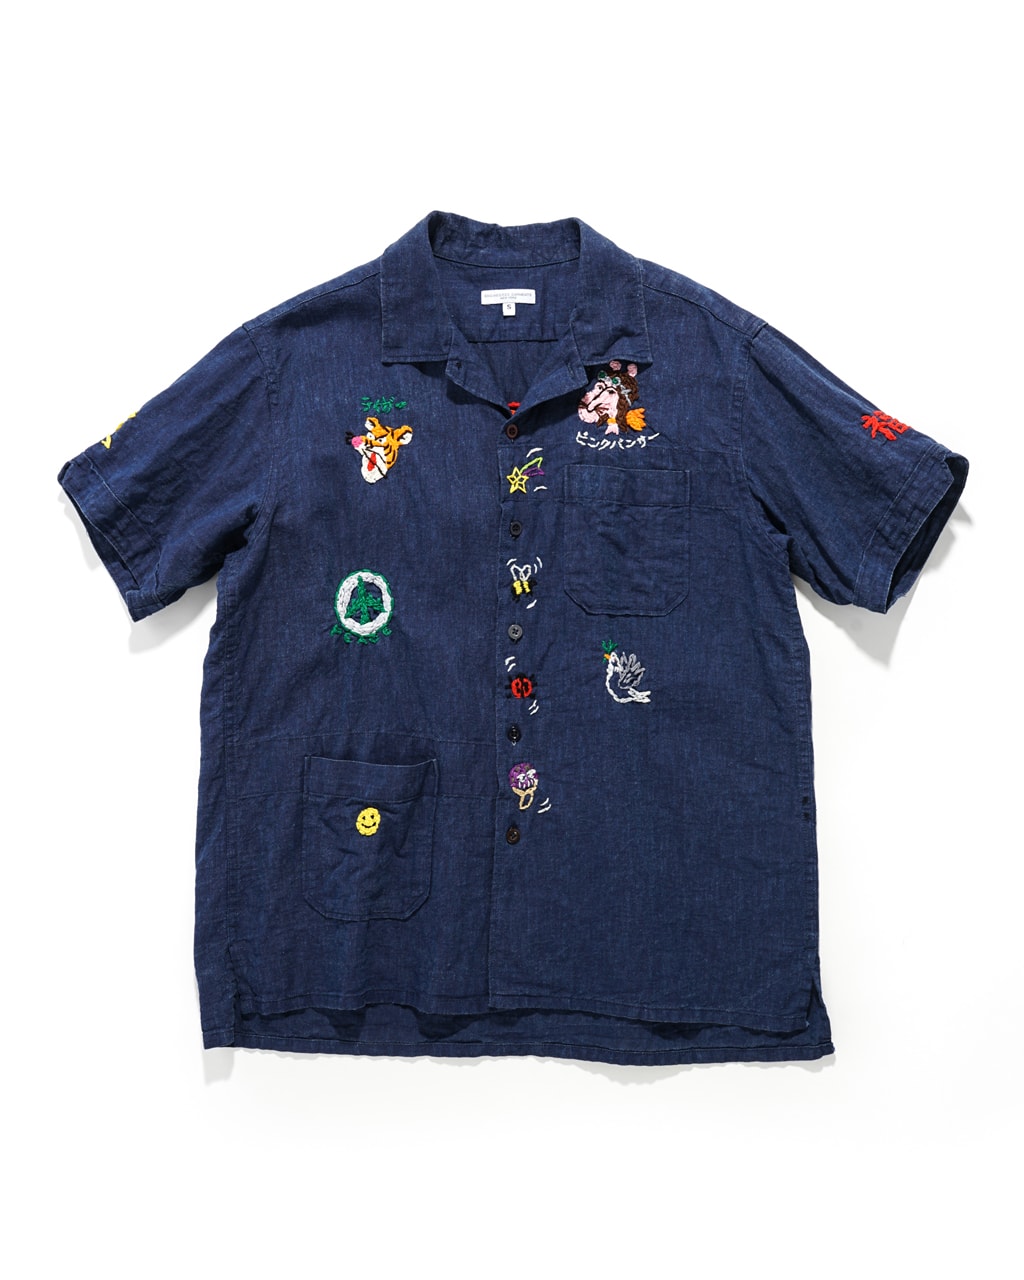 Engineered Garments x Otakara NYC at NEPENTHES NY pop up collaboration embroidery workaday collection stitch remake